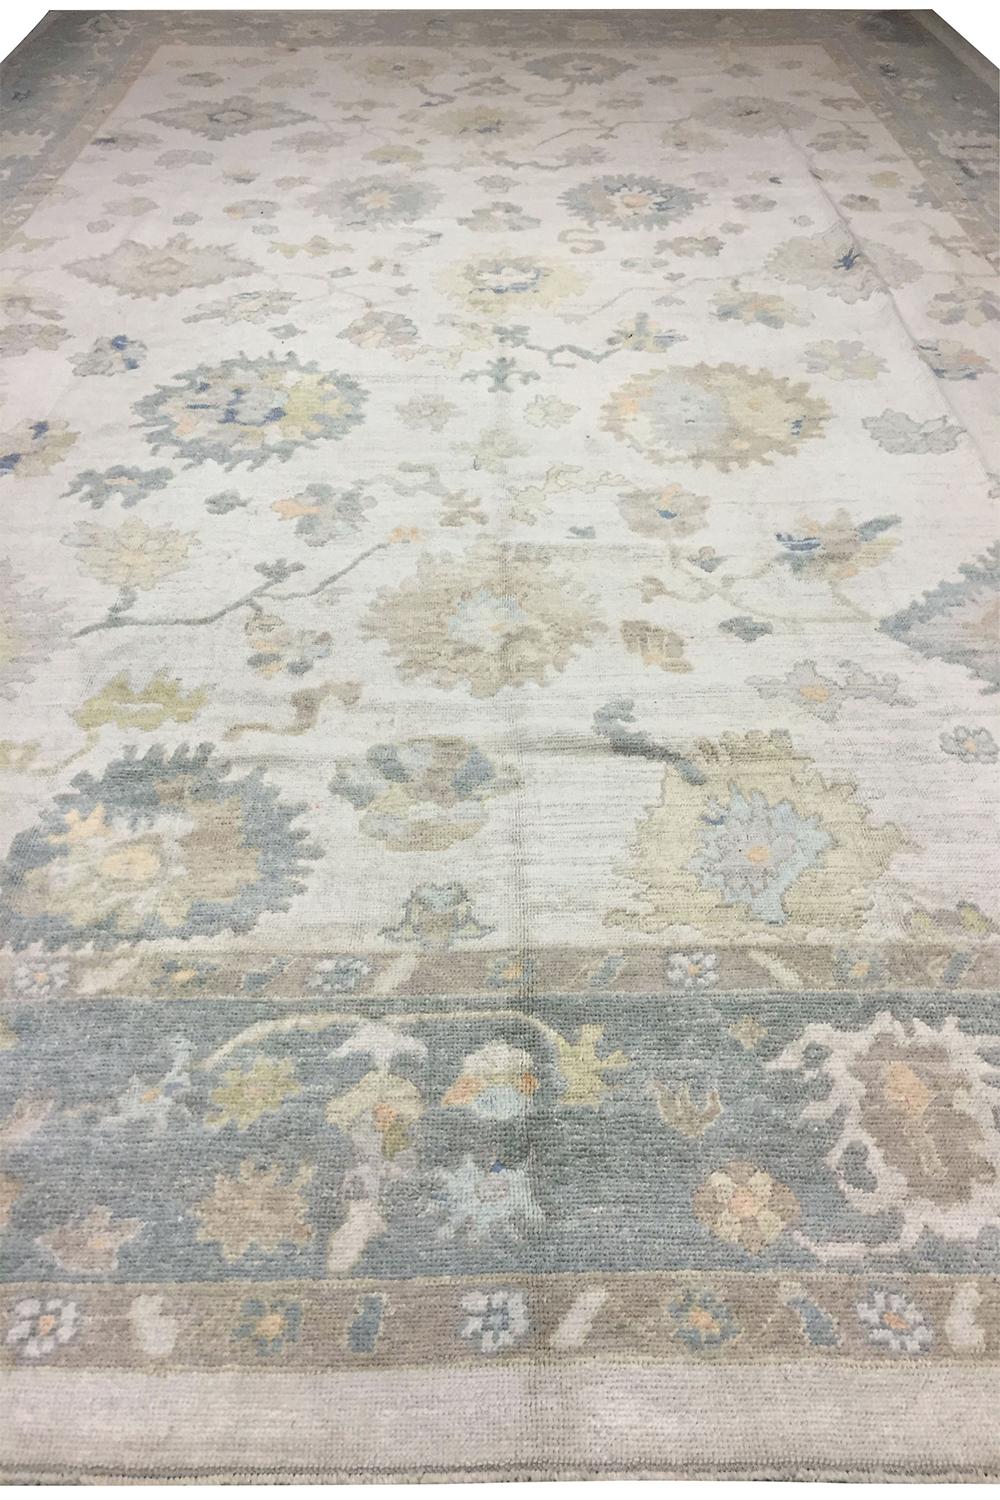 Oversize Oushak style handwoven carpet rug, 14'4 x 20'8. Handwoven in Turkey using the finest of materials this is a Classic recreation of an Oushak rug in soft colors.